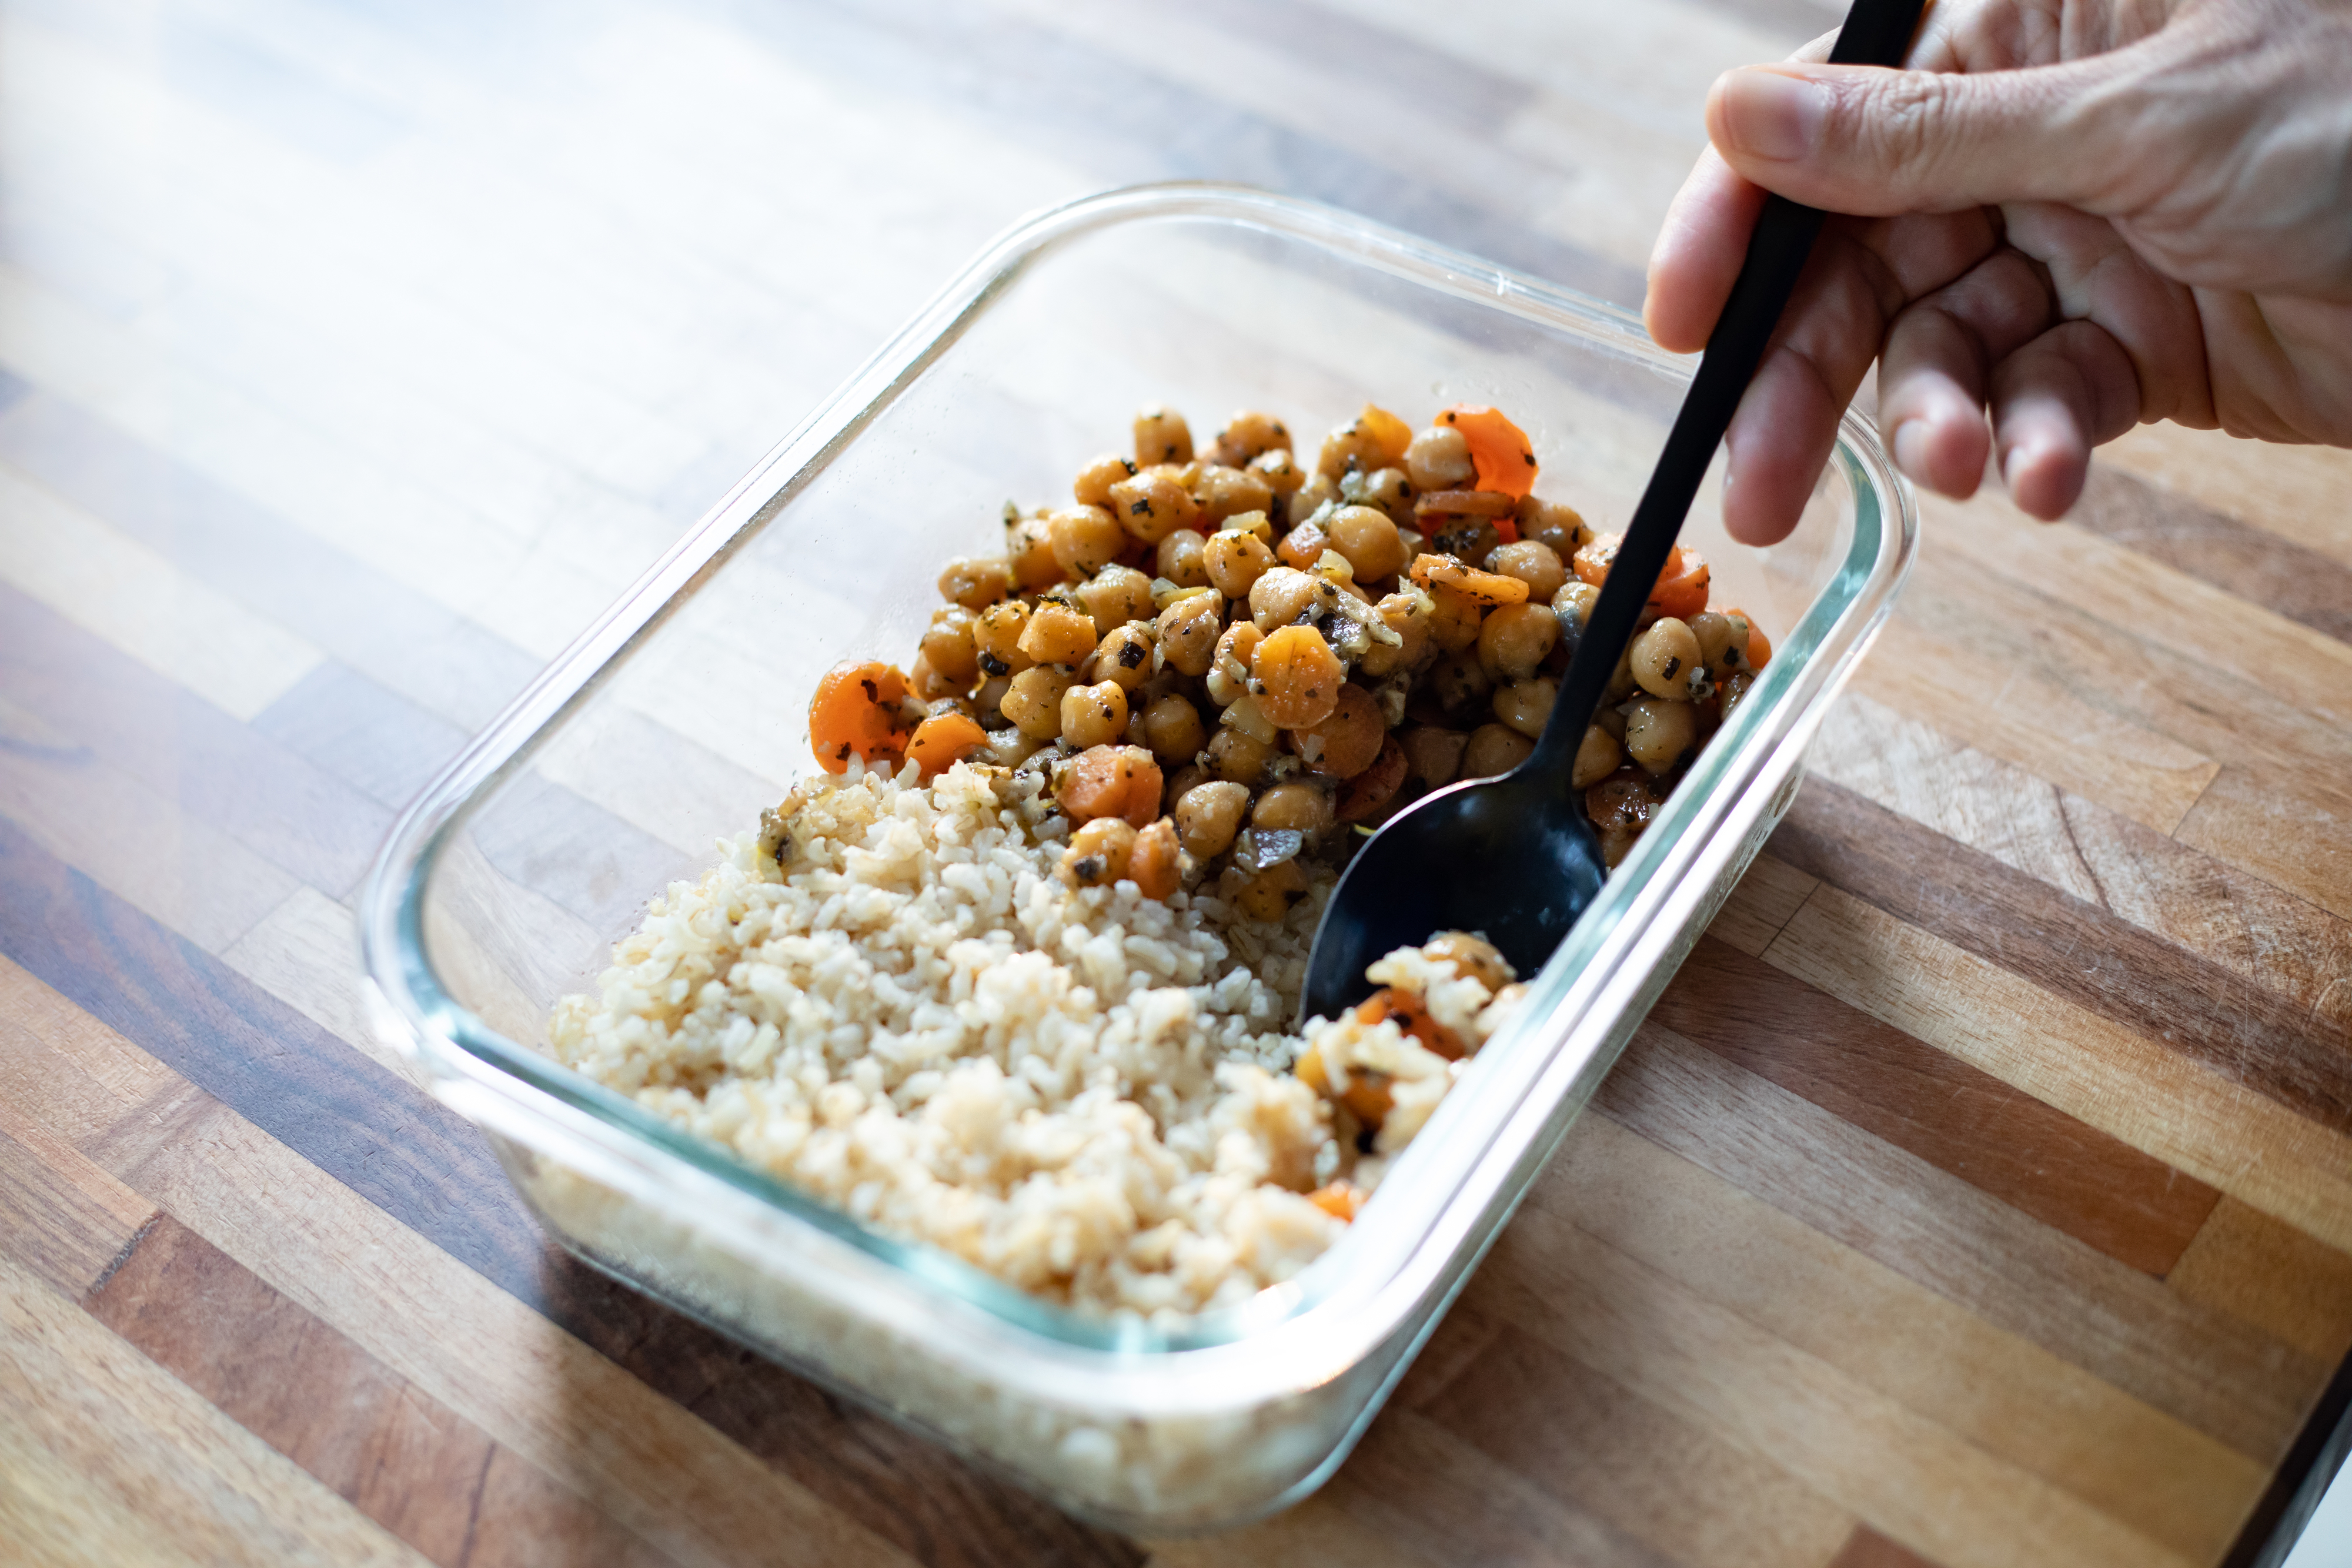 Meal-prep concept with chickpeas, carrots, and rice in a glass container being eaten with a fork